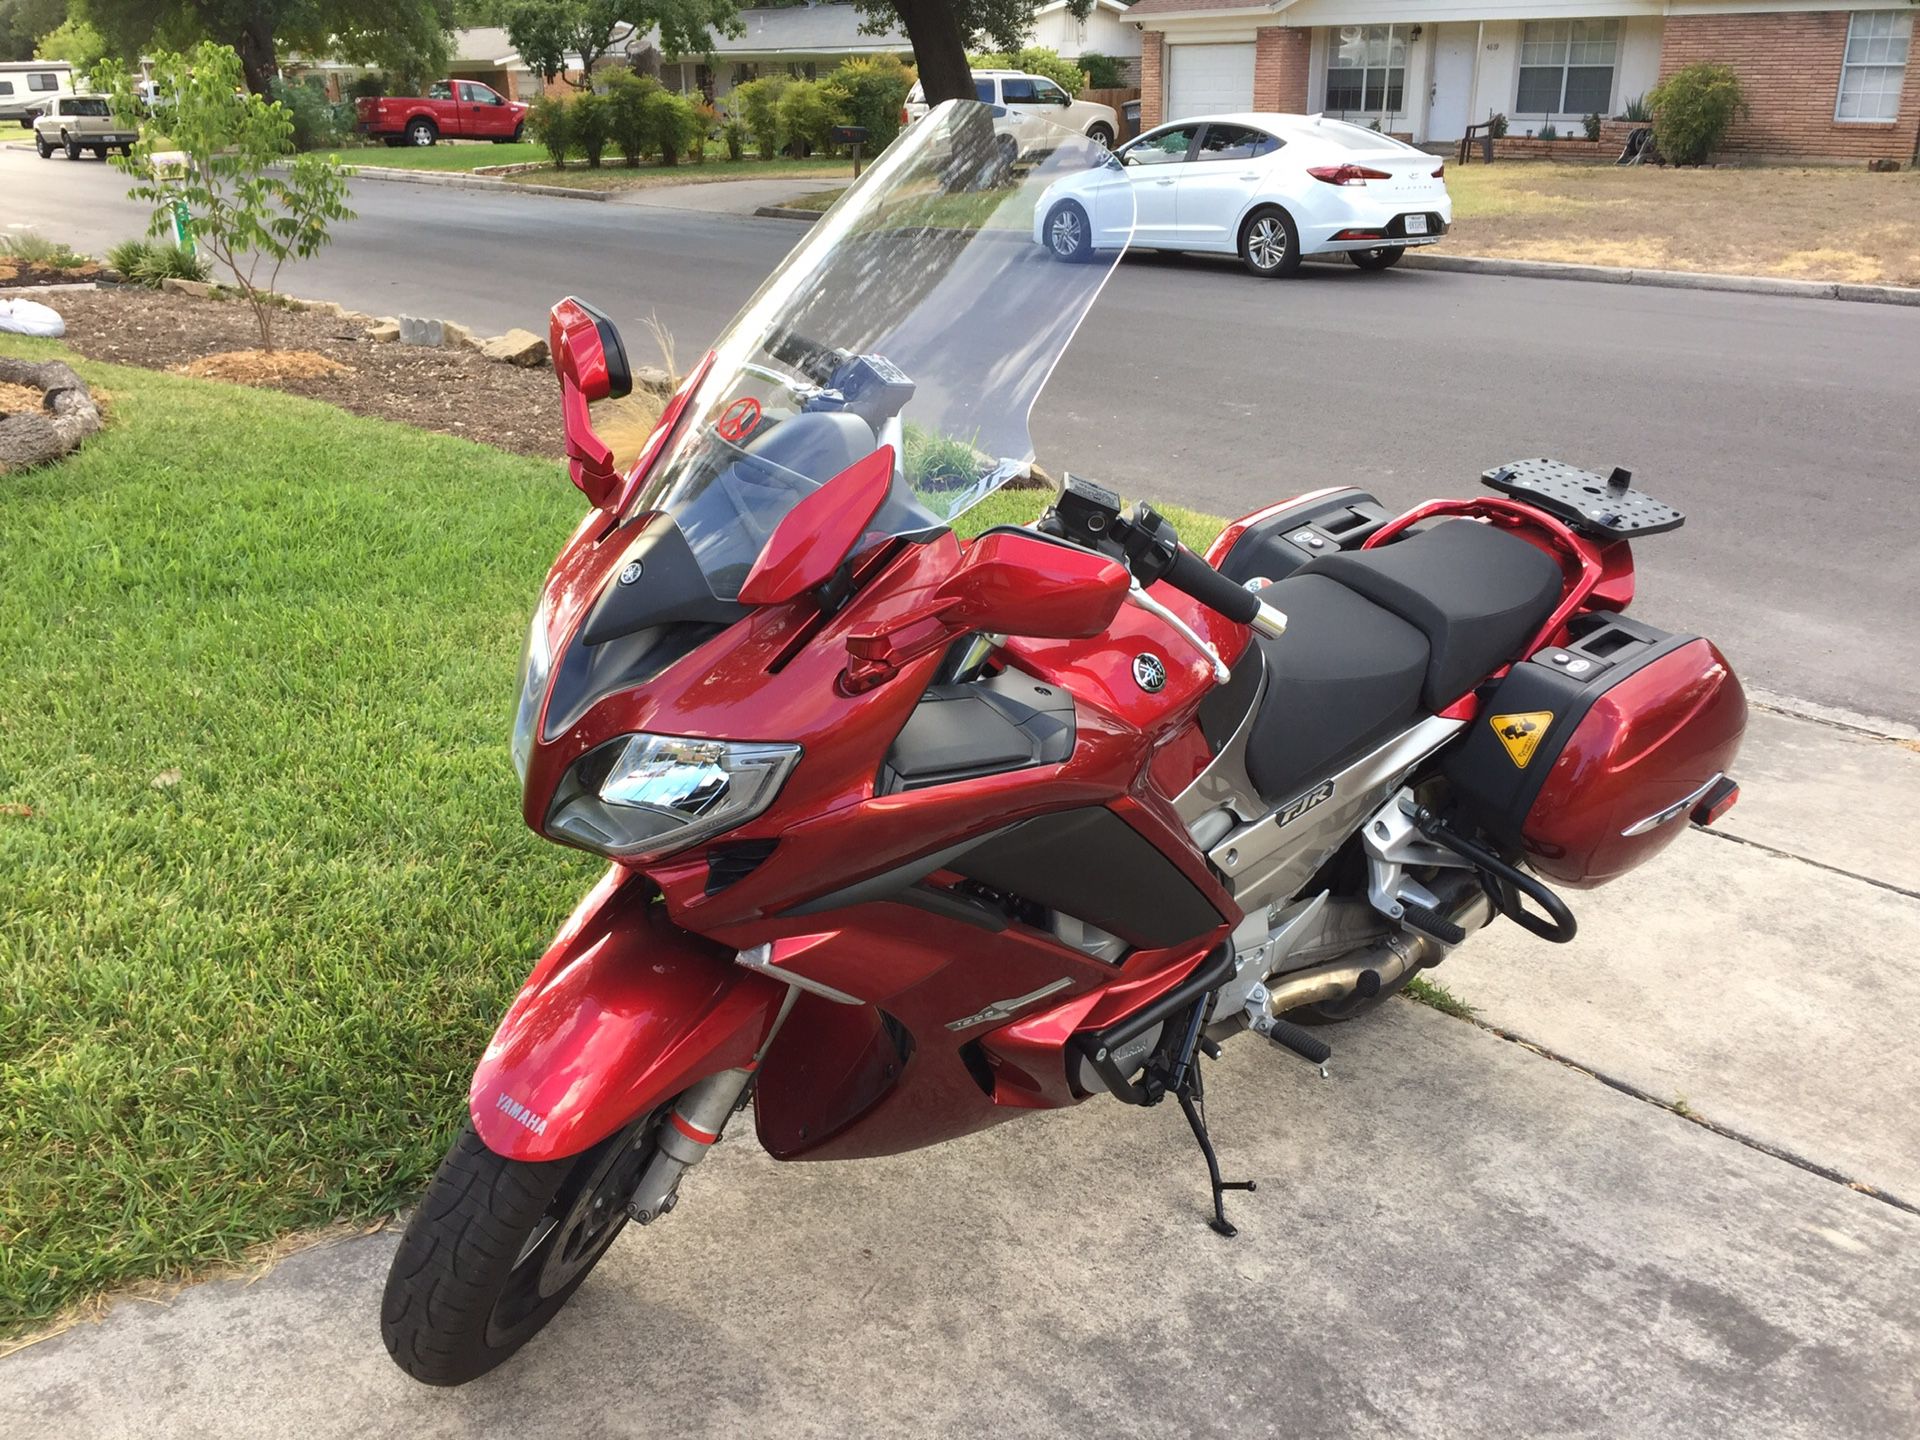 Yamaha 2014 FJR1300 Sports/Touring Motorcycle. $7200 Lots of Extras